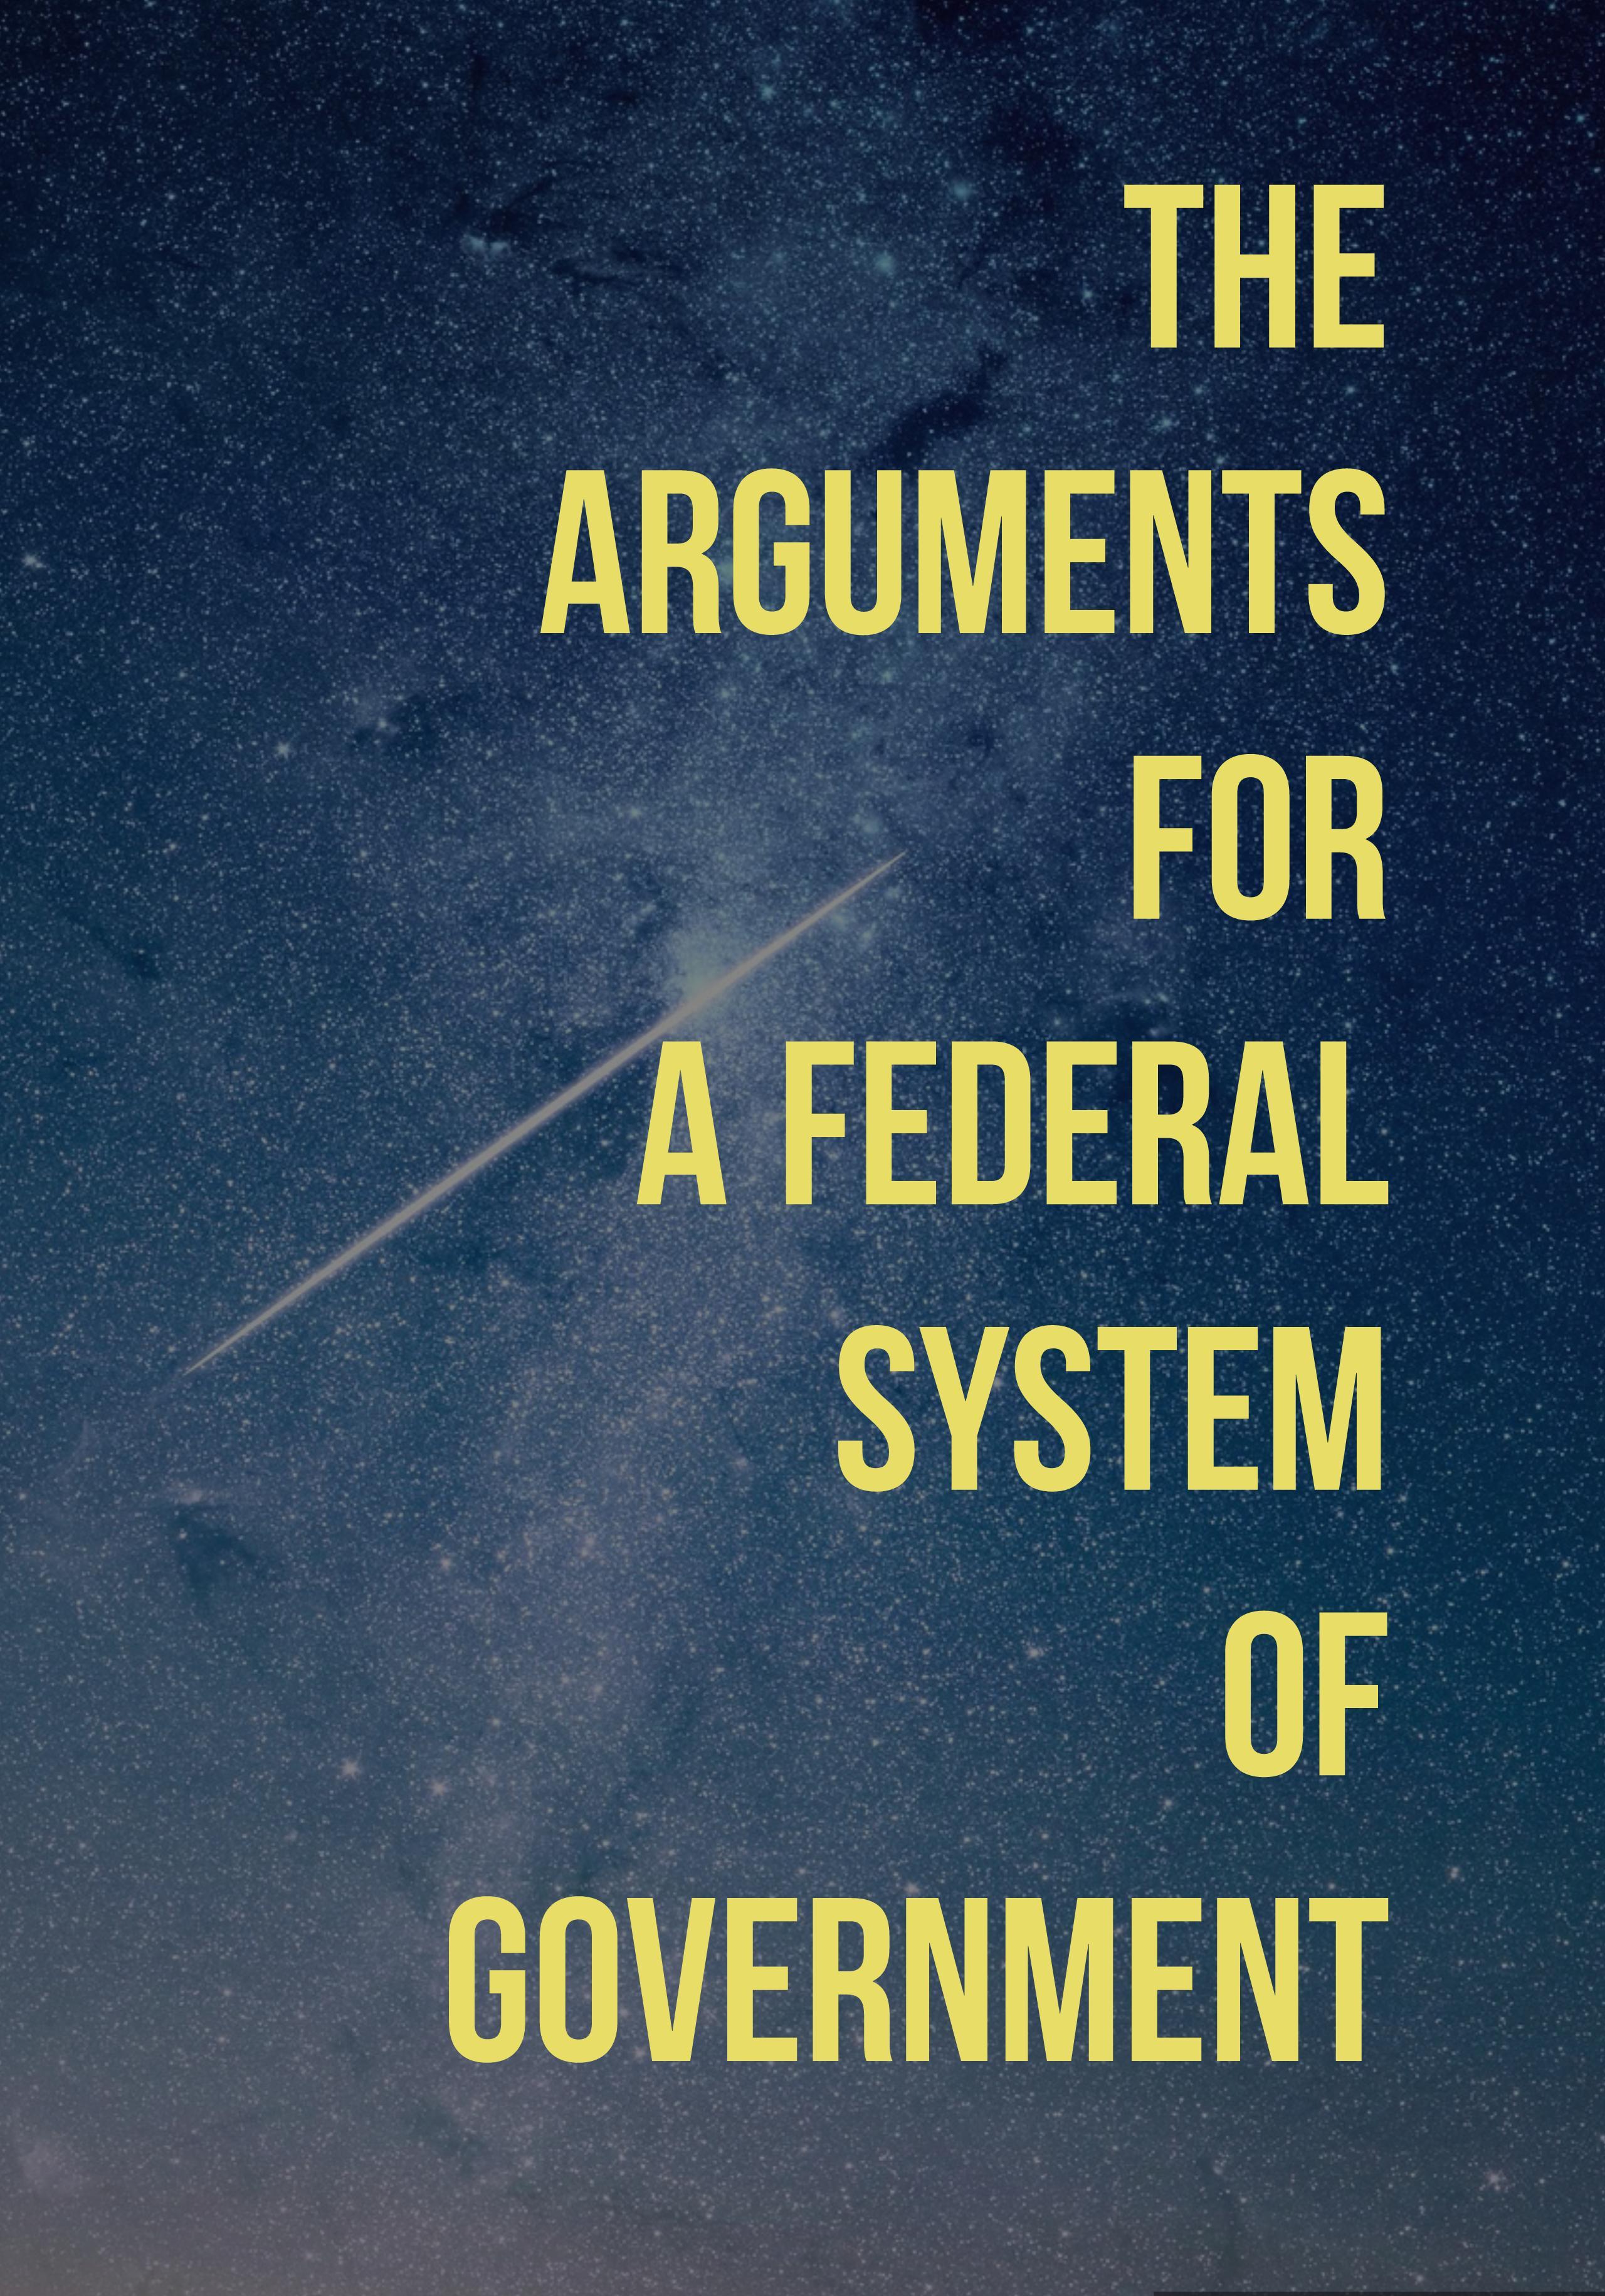 The Arguments for a Federal System of Government